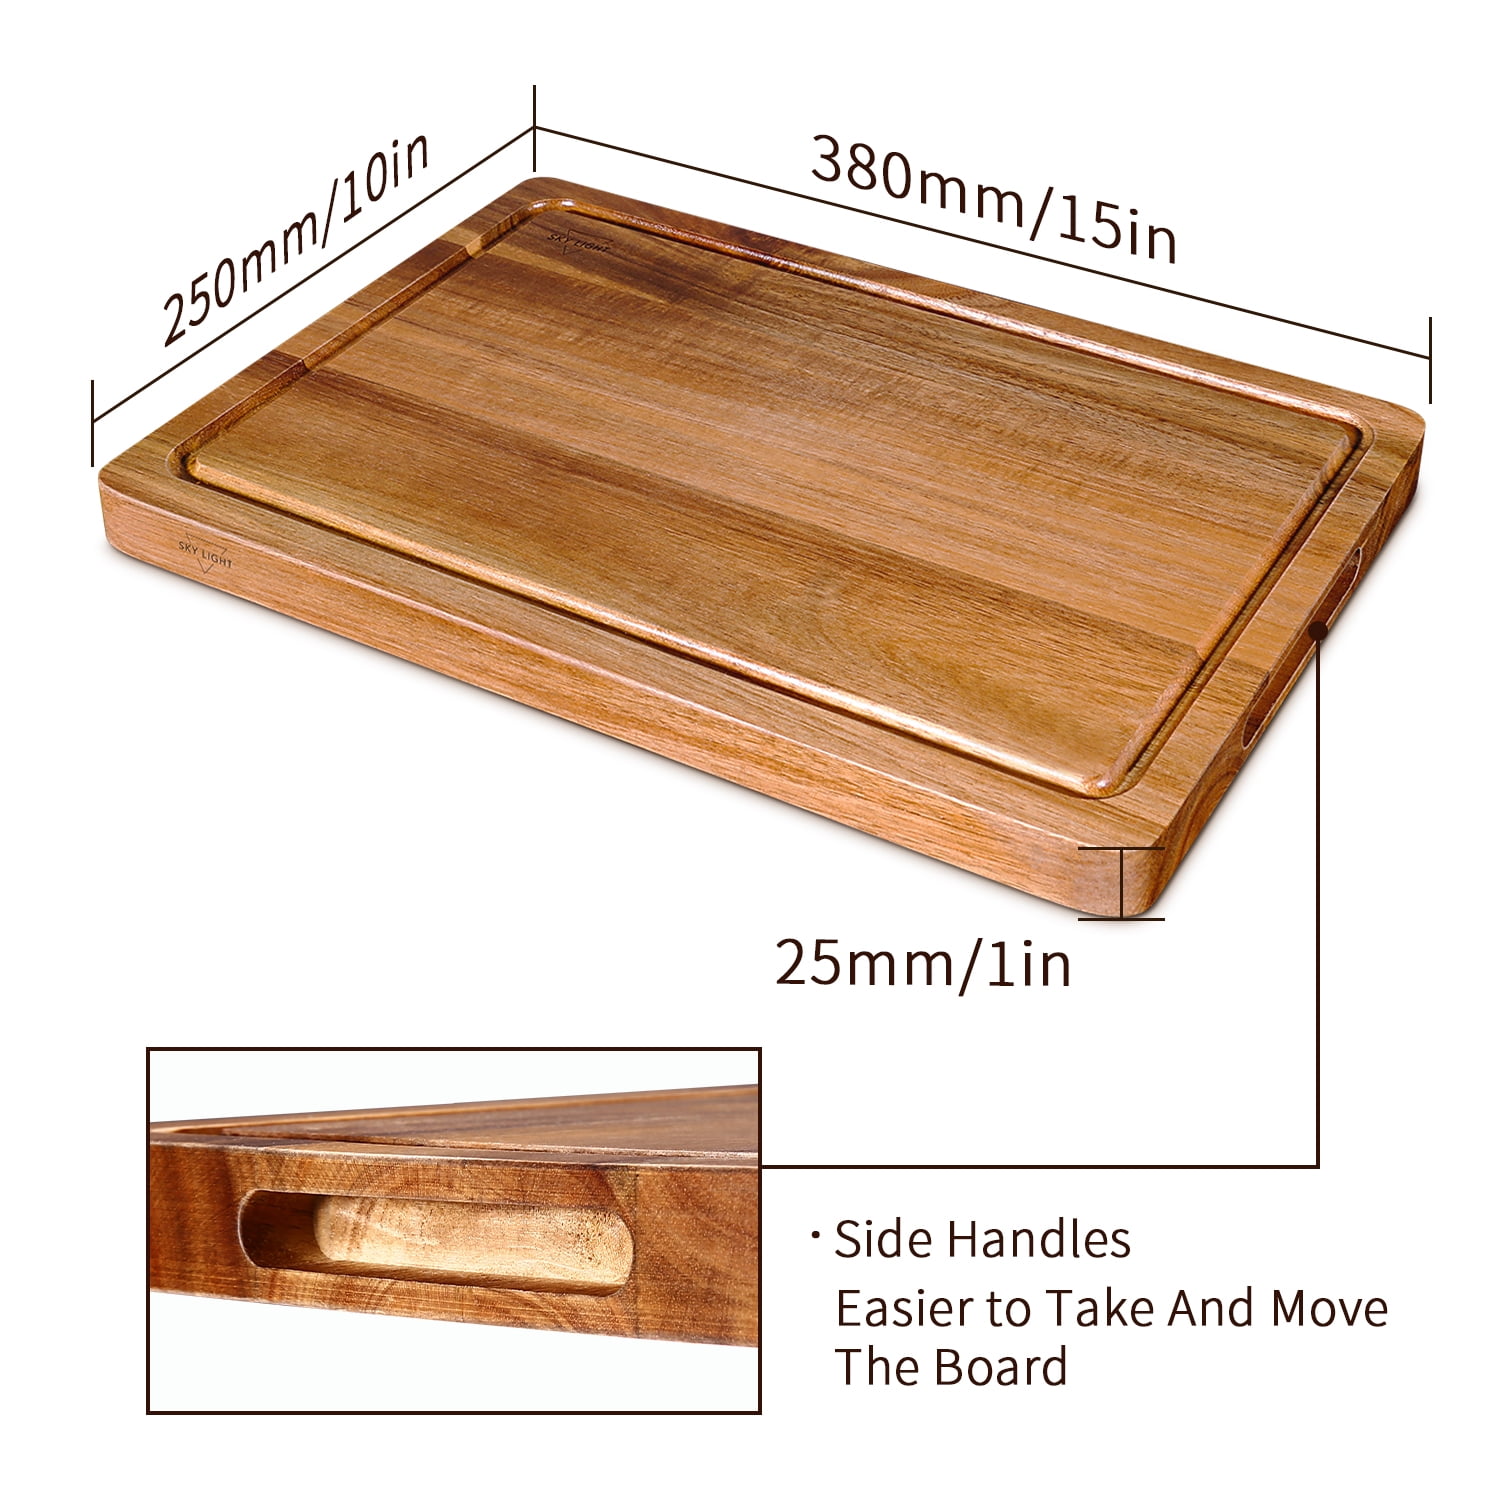 SKY LIGHT 24 Inch Extra Large Wood Cutting Board for Kitchen, Premium  Acacia Wooden Chopping Board with Juice Groove, Reversible Heavy Duty  Butcher Block Thick Cheese Charcuterie Board 